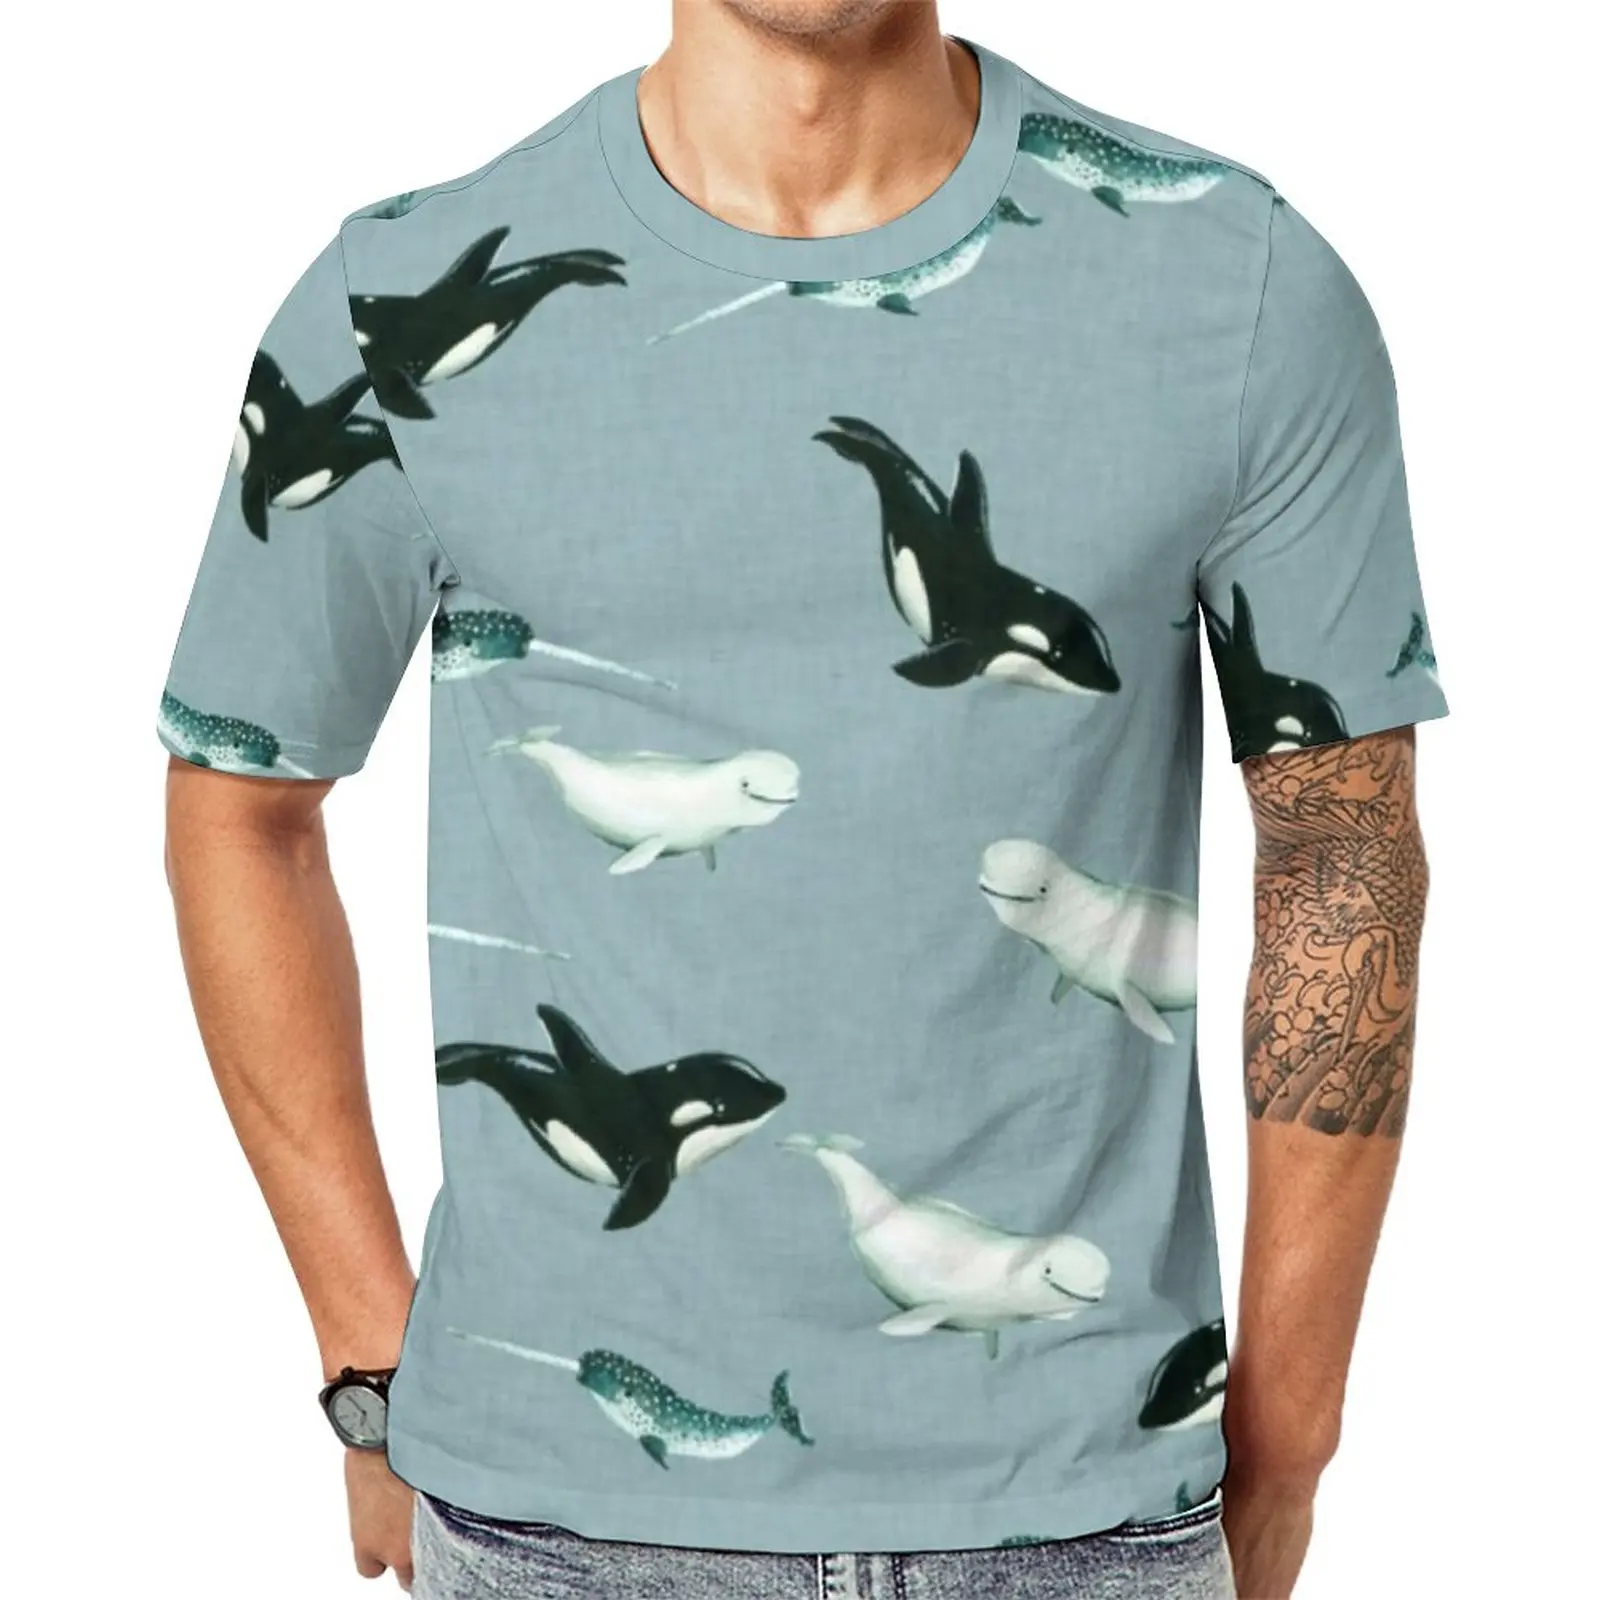 

Arctic Animal Print T-Shirt Whales And Bear Trendy T-Shirts Men Y2K Tee Shirt Summer Short Sleeves Graphic Clothes Big Size 6XL